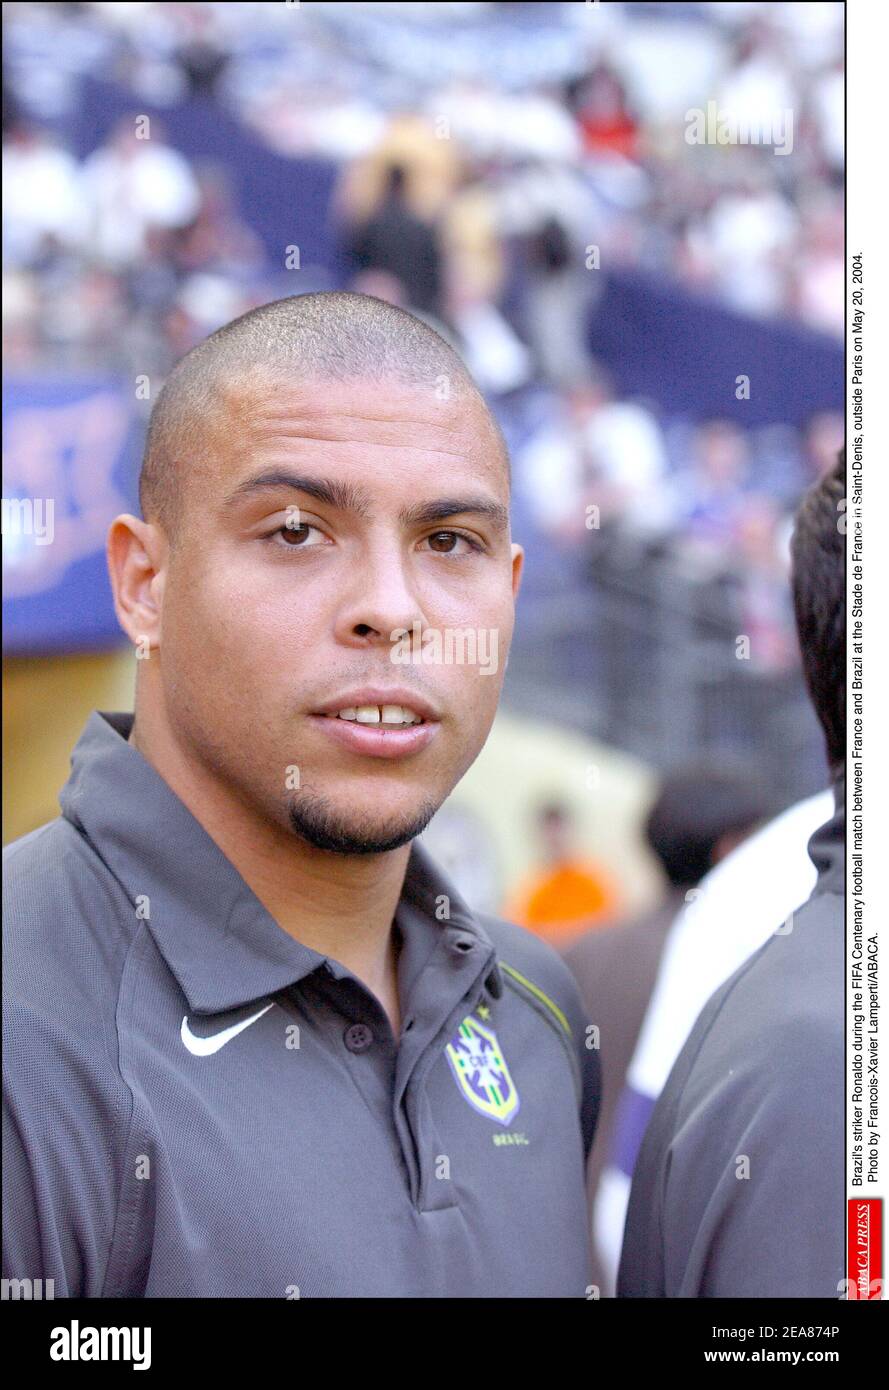 Brazil's striker Ronaldo during the FIFA Centenary football match between France and Brazil at the Stade de France in Saint-Denis, outside Paris on May 20, 2004. Photo by Francois-Xavier Lamperti/ABACA. Stock Photo